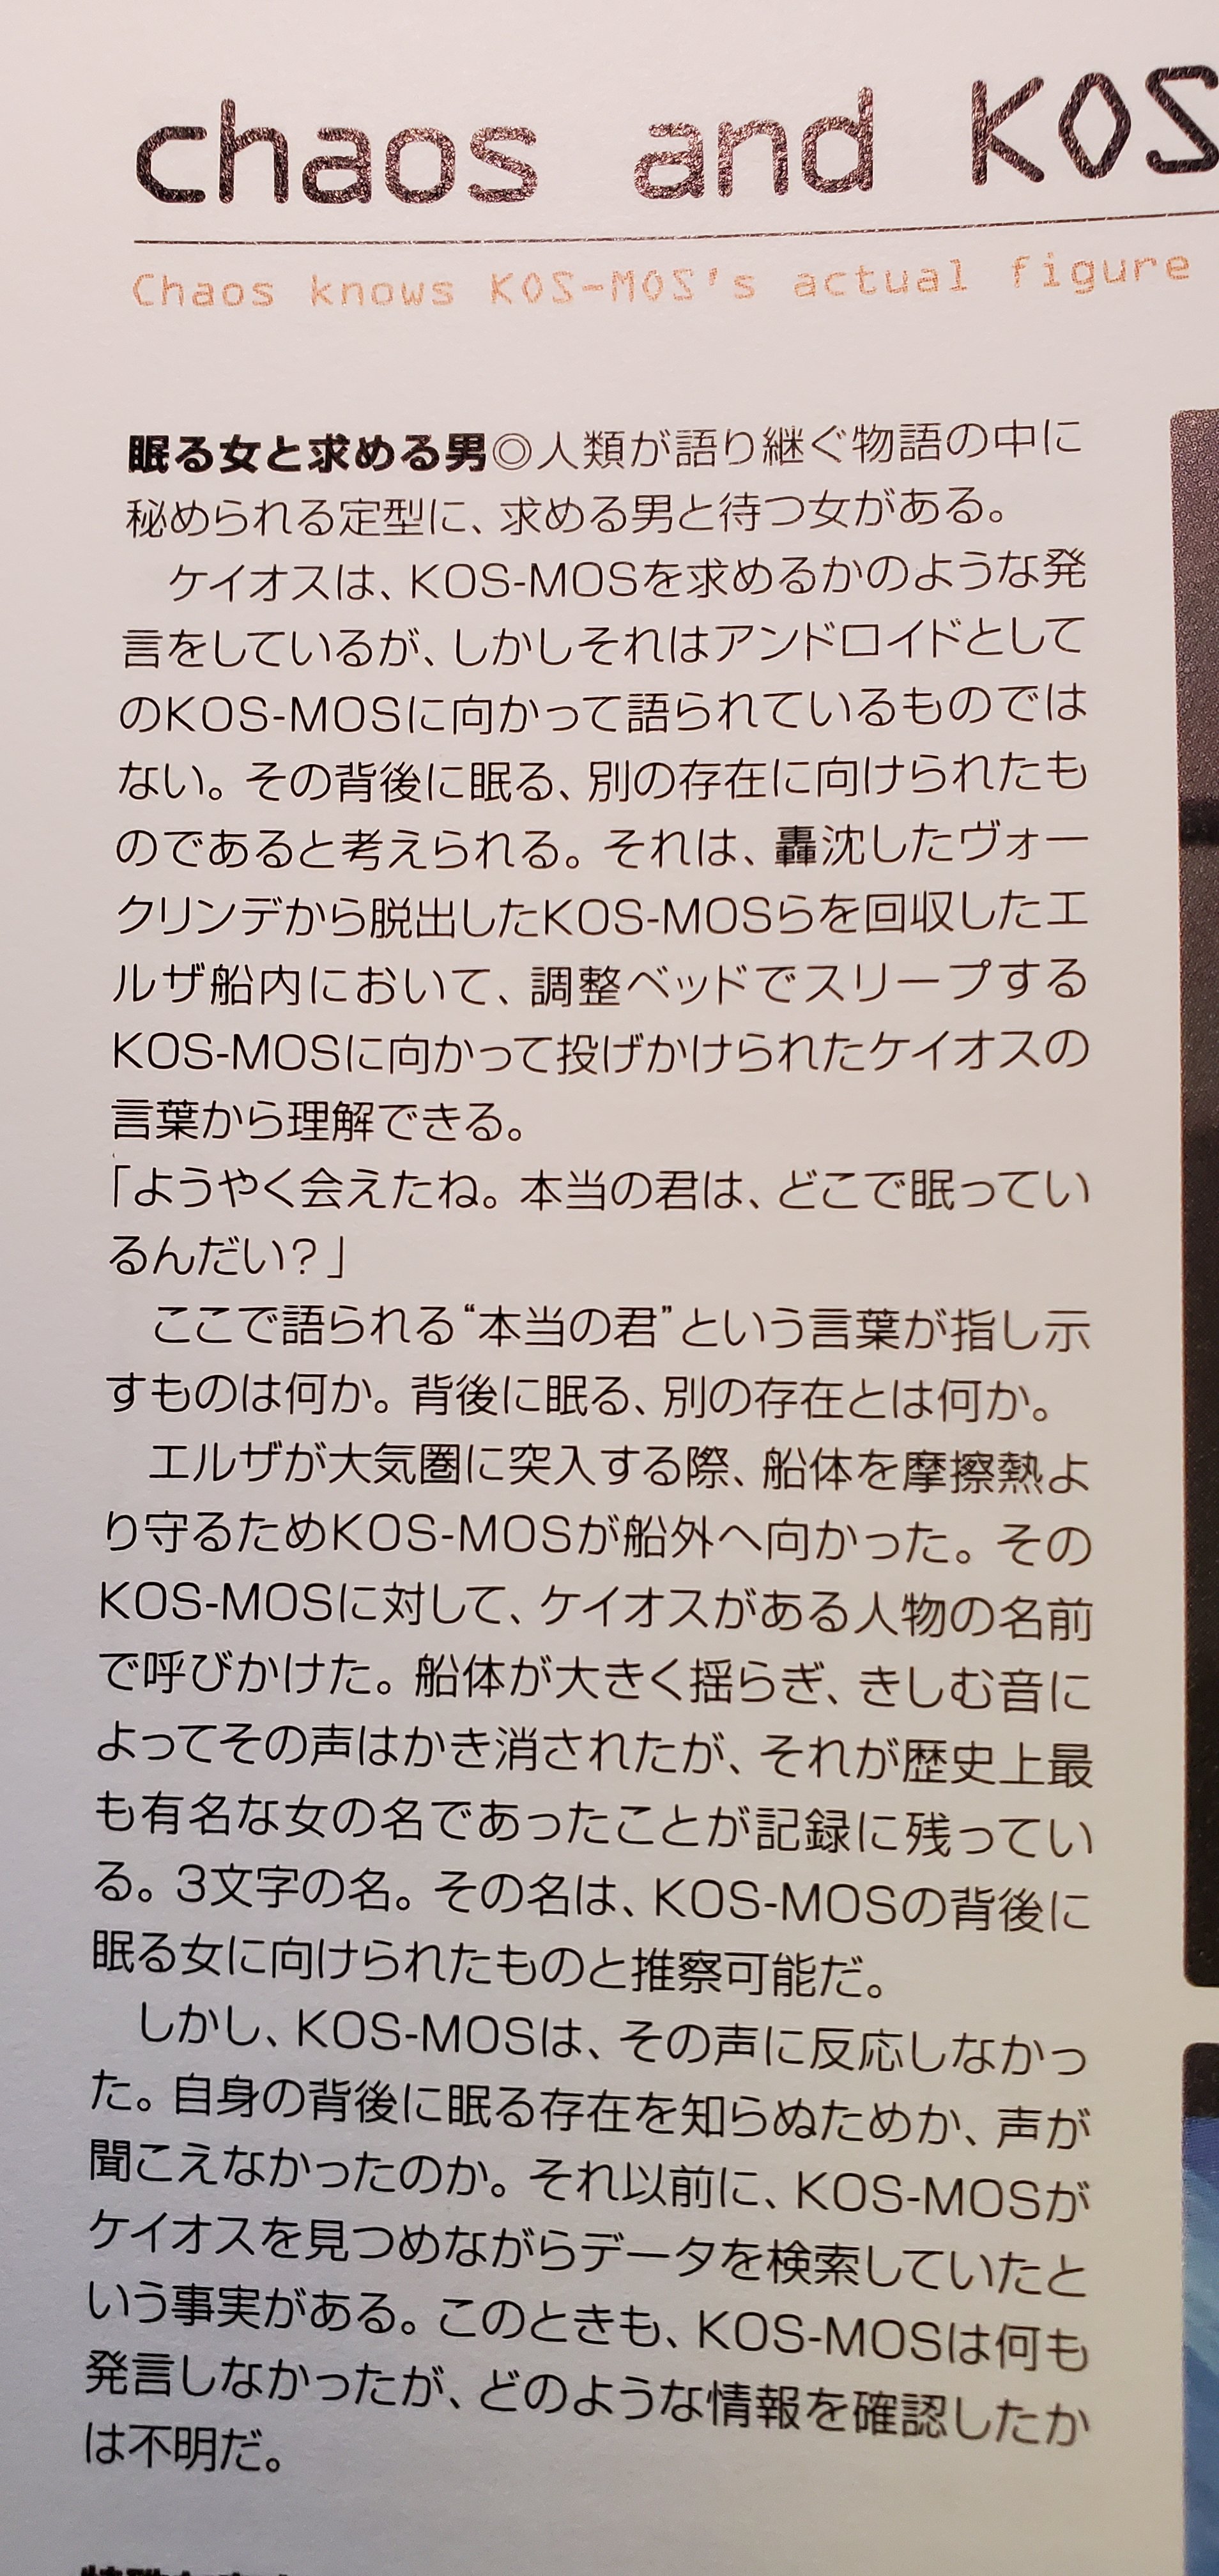 Photograph of the upper left side of a page in the ODM for Xenosaga Episode I, titled “chaos and KOS-[MOS]” (the second half of KOS-MOS' name is cut off by the edge of the photo), with the subtitle “Chaos [sic, capitalized in the original text] knows KOS-MOS's actual figure” and a few paragraphs of Japanese text below.